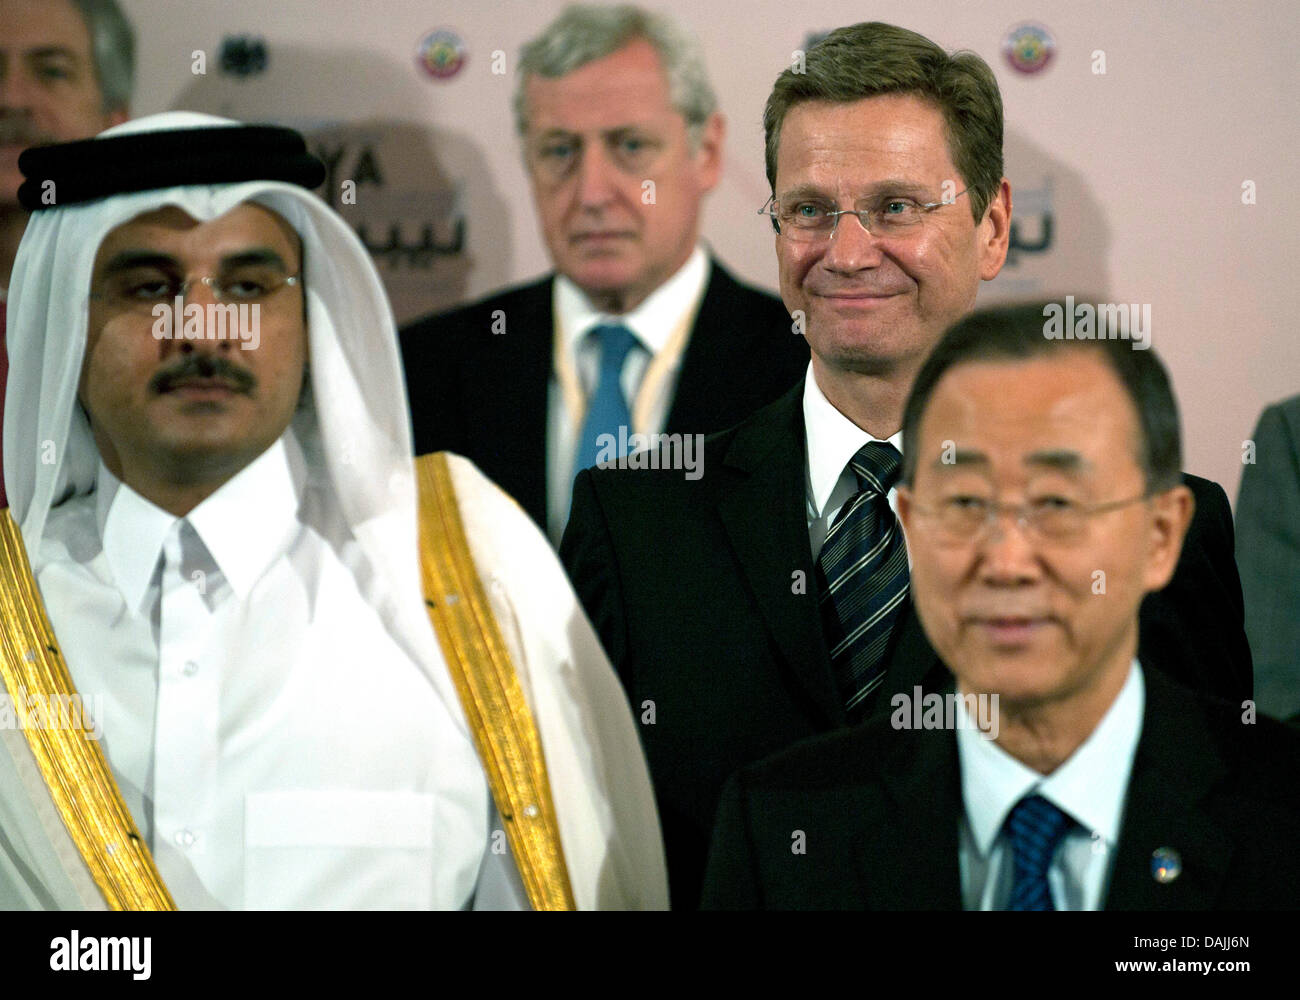 The Foreign Ministers (L-R) of Qater, Sheik Hamad bin Jassim bin Jabor Al Thani, Guido Westerwelle of Germany and UN Secretary General Ban Ki-Moon (and a person not identified in the background) take part in a meeting of the Libya Contact Group in Doha, Qatar, 13 April 2011. The politicians intend to negotiate further political proceedings in Libya. Photo: Peer Grimm Stock Photo